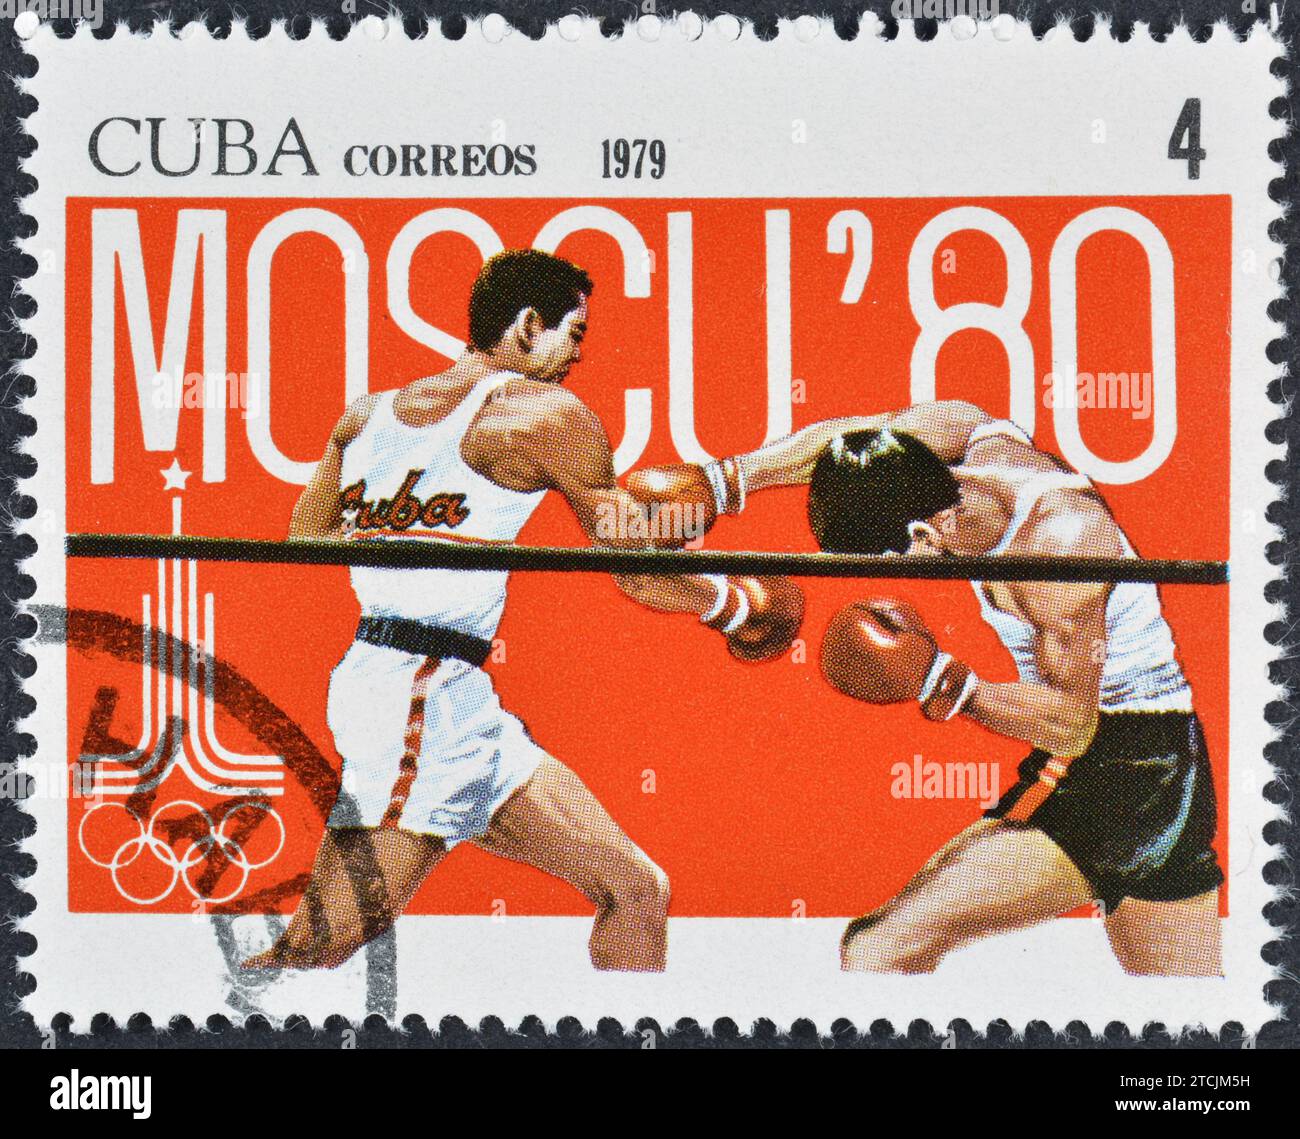 Cancelled postage stamp printed by Cuba, that shows Boxing, Summer Olympic Games 1980 - Moscow, circa 1979. Stock Photo